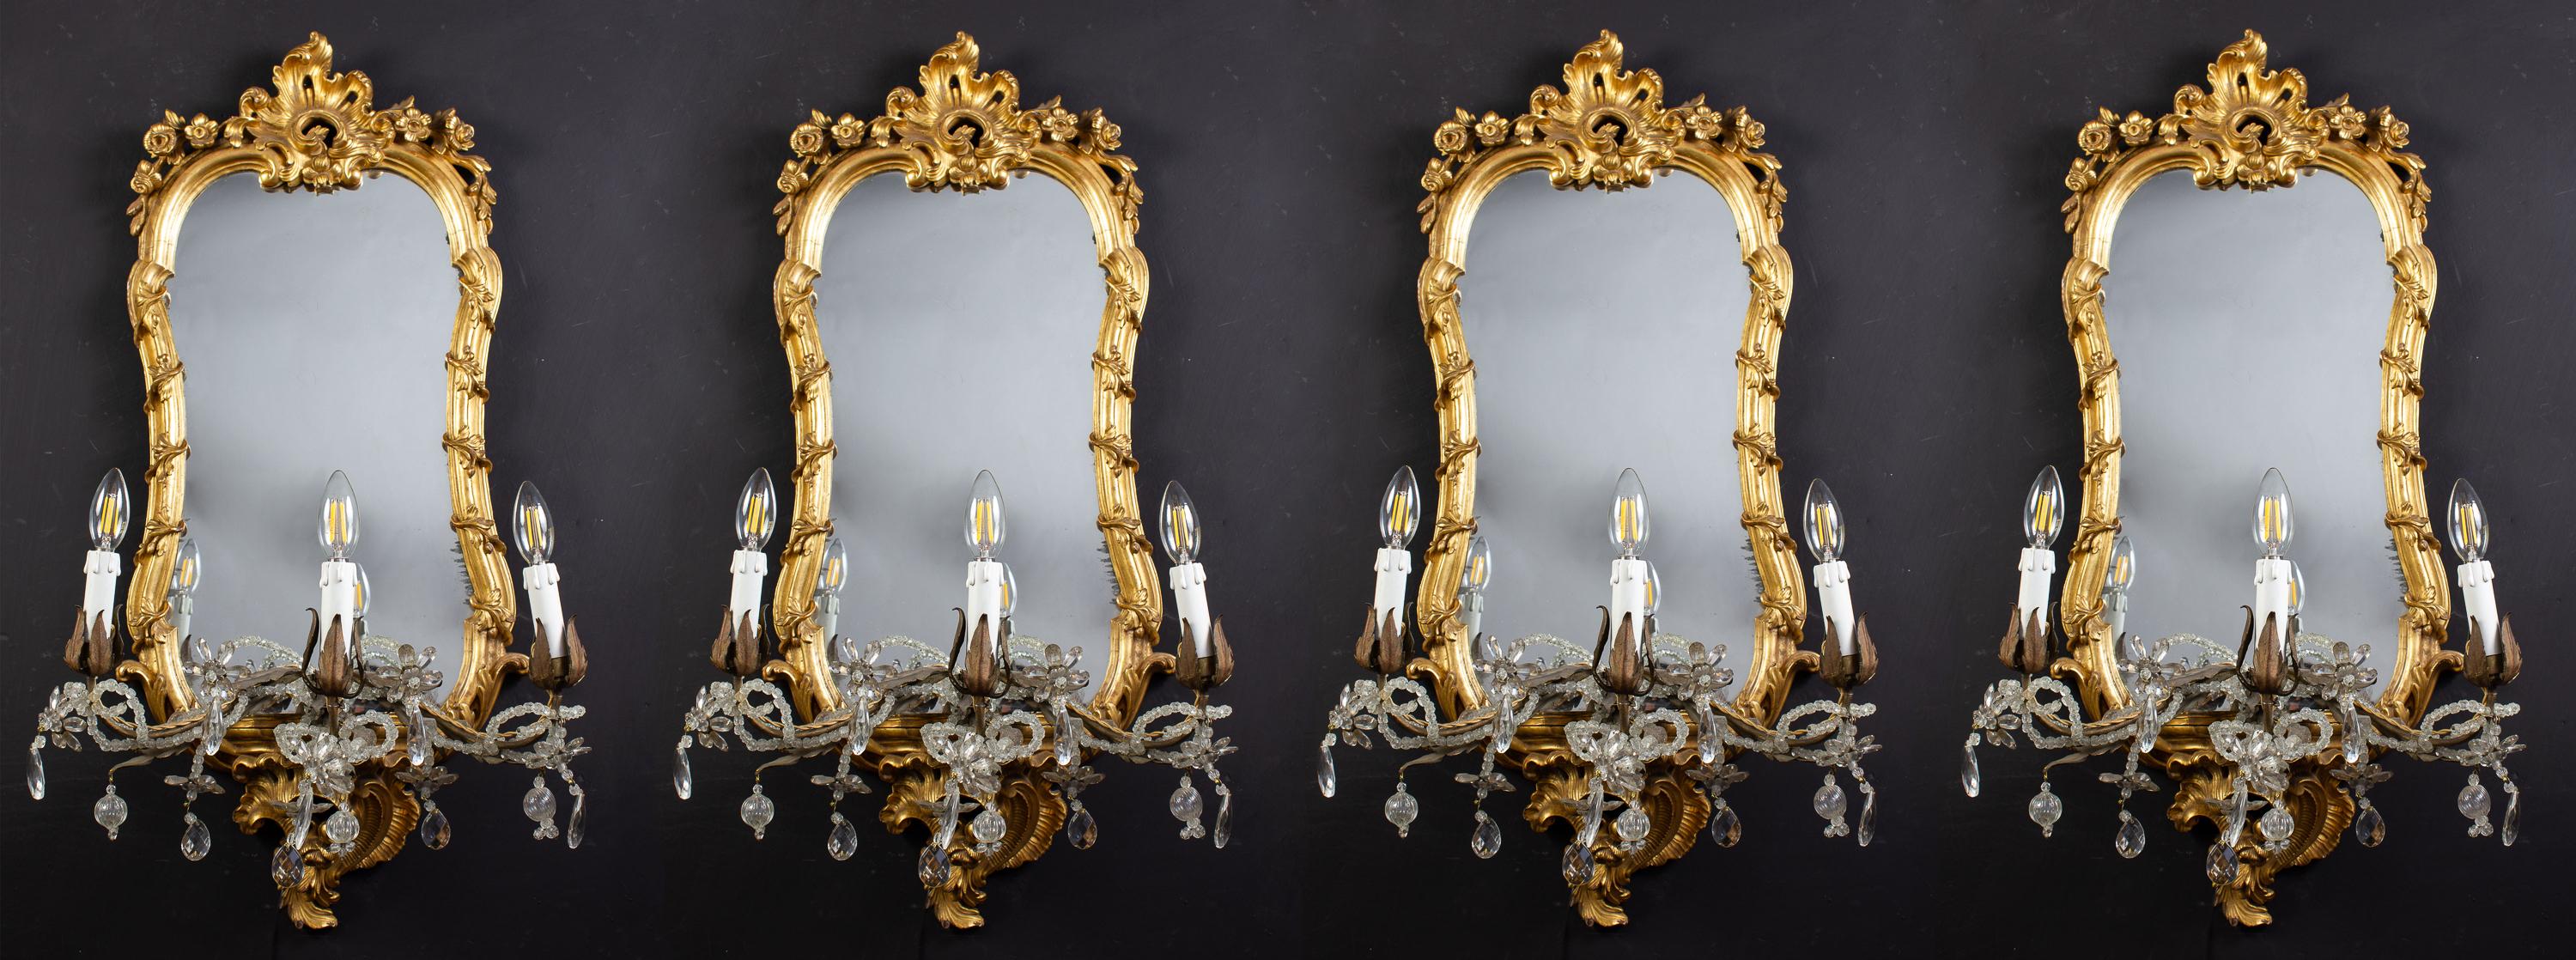 Four 18th Century Italian Giltwood Mirrors or Wall Lights Roma, 1750 For Sale 9